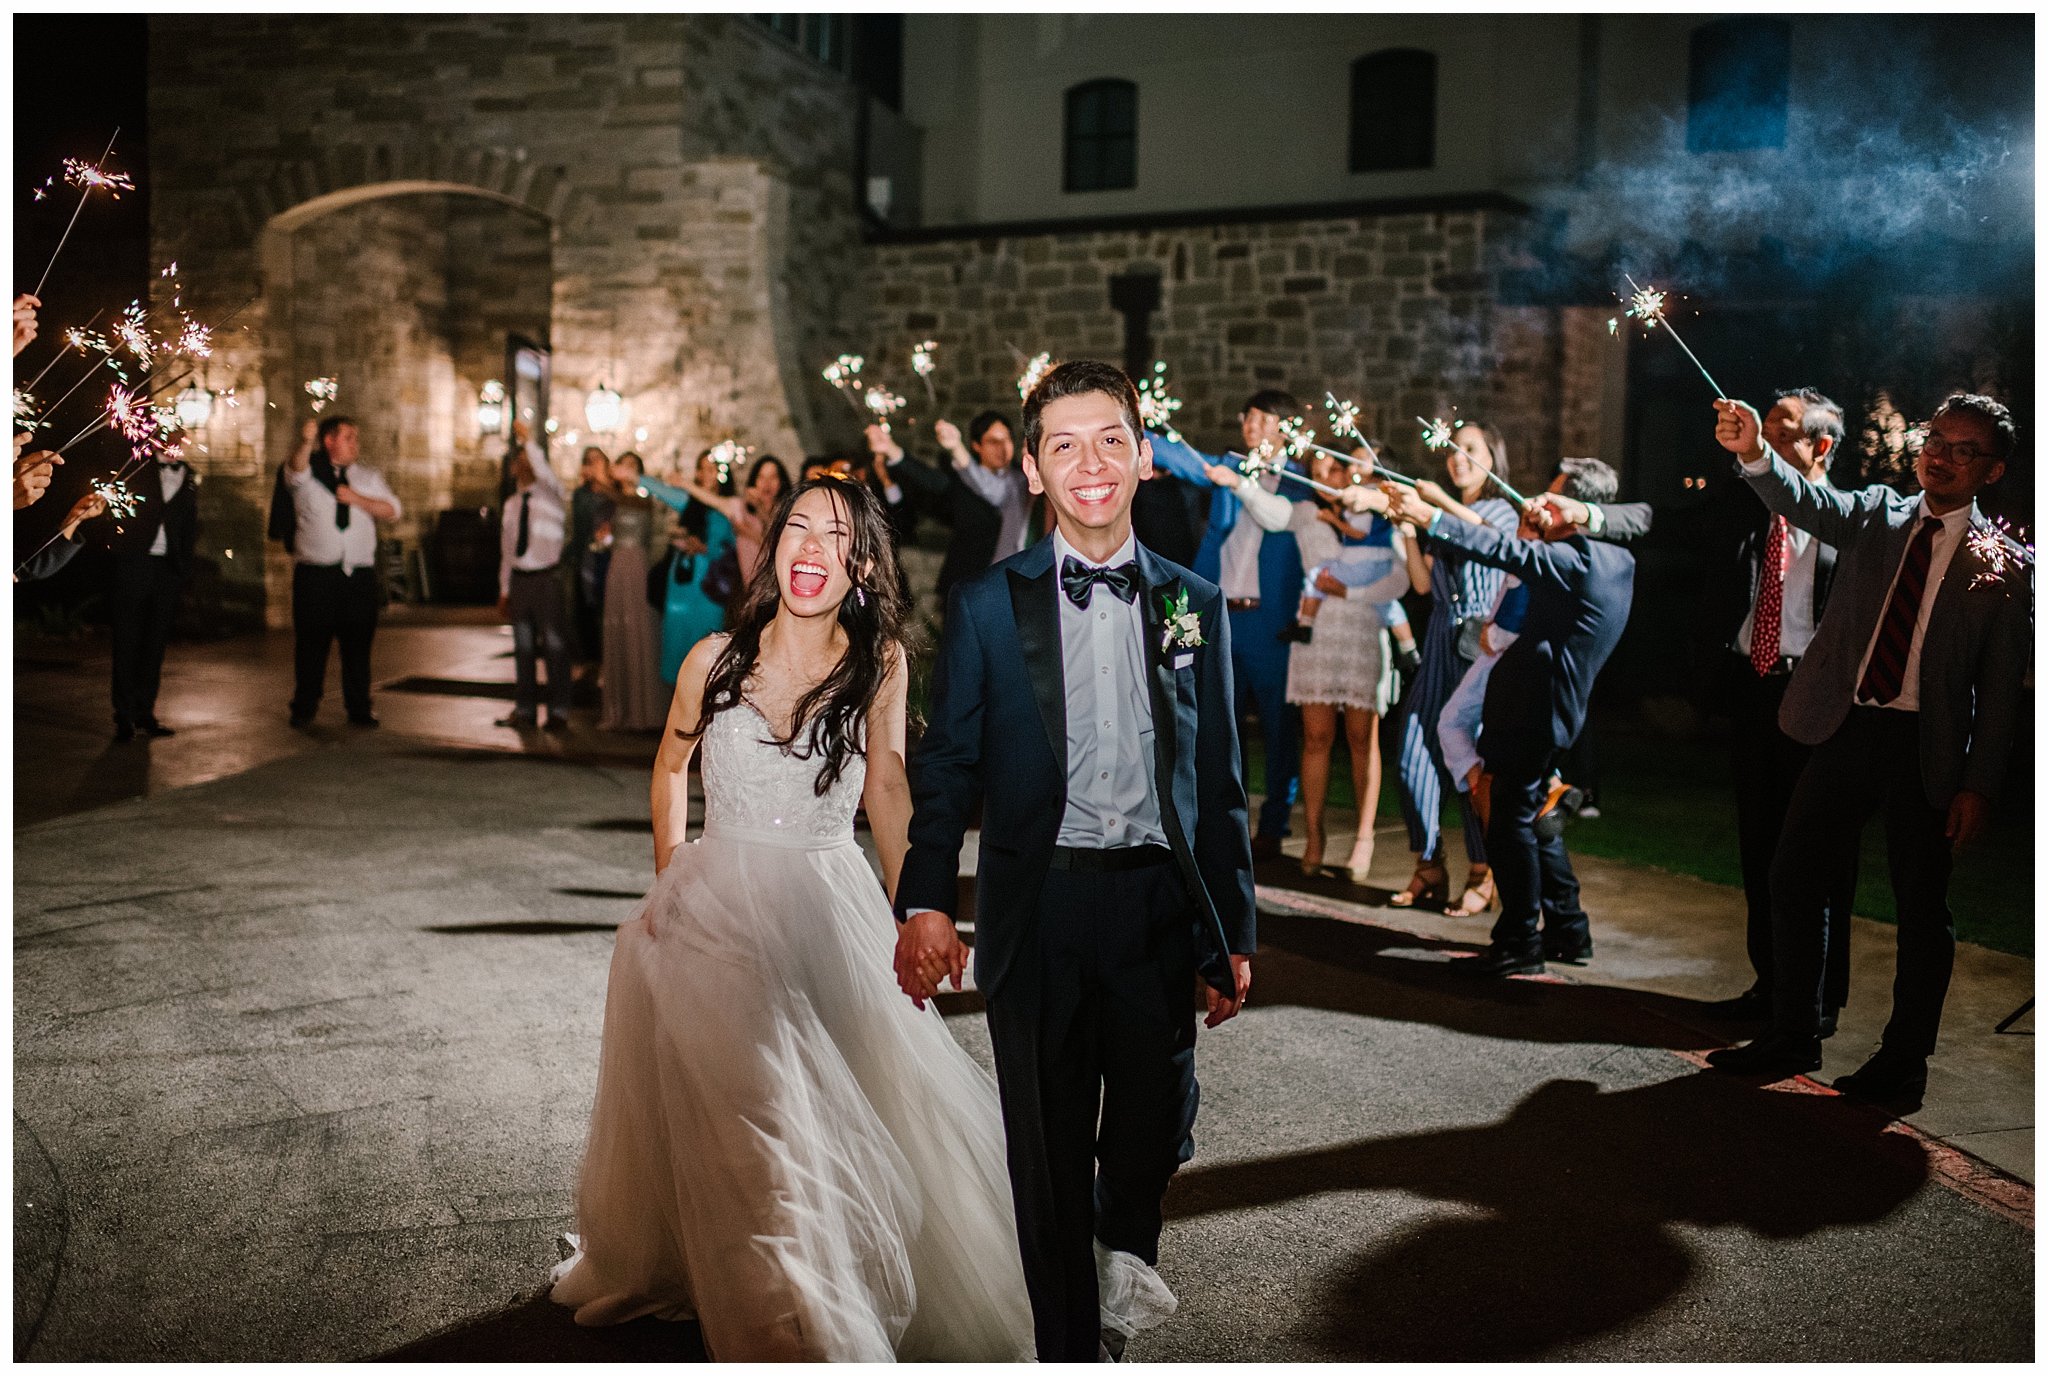 Cute couple smiling during sparkler exit